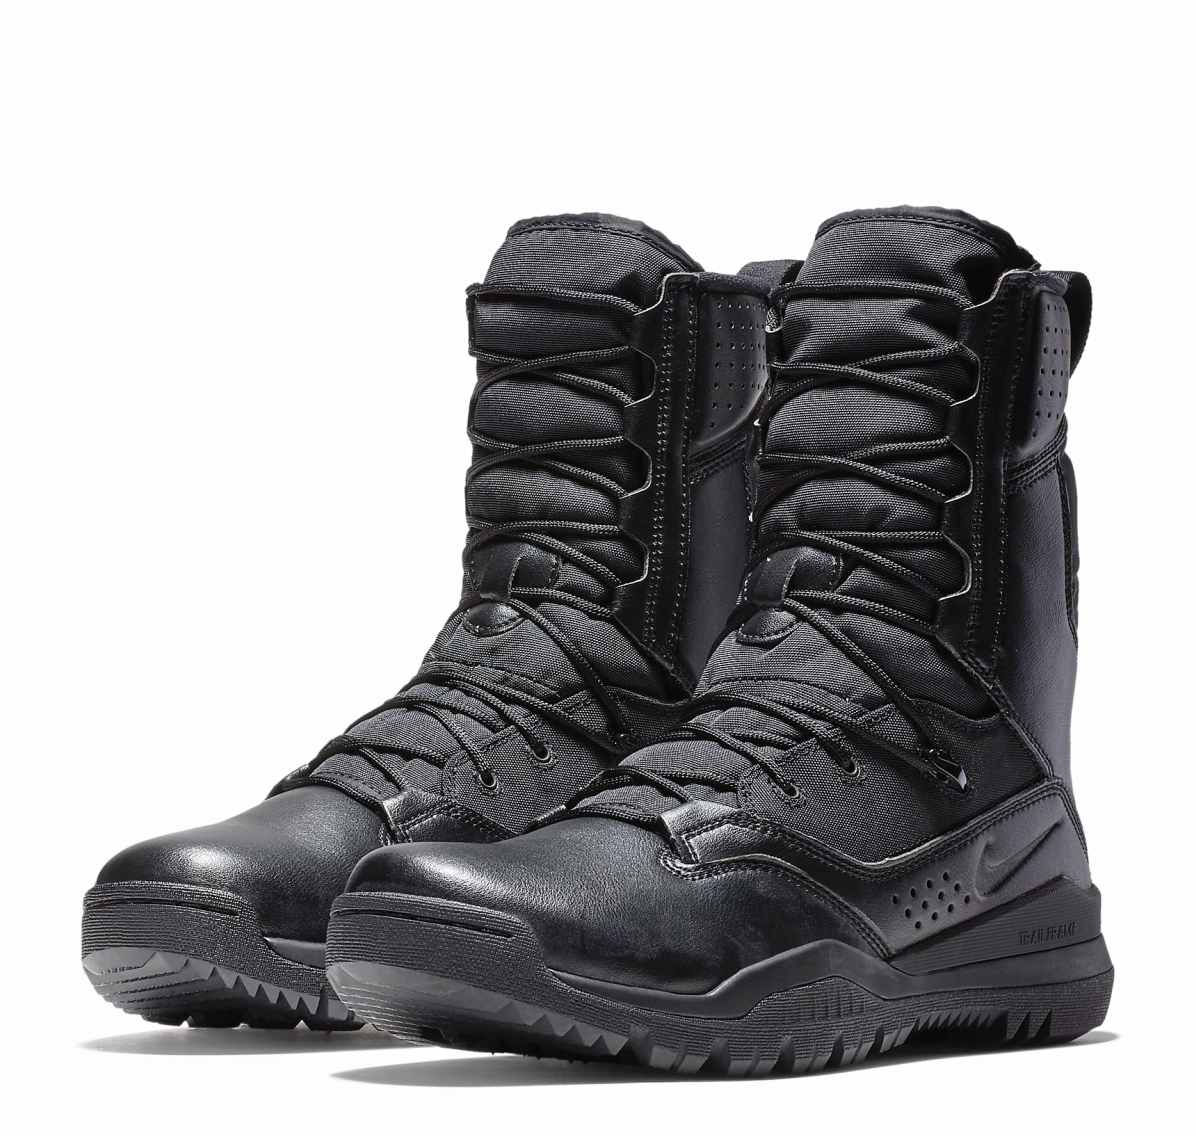 NIKE SFB FIELD 2 8" Black Tactical Boots